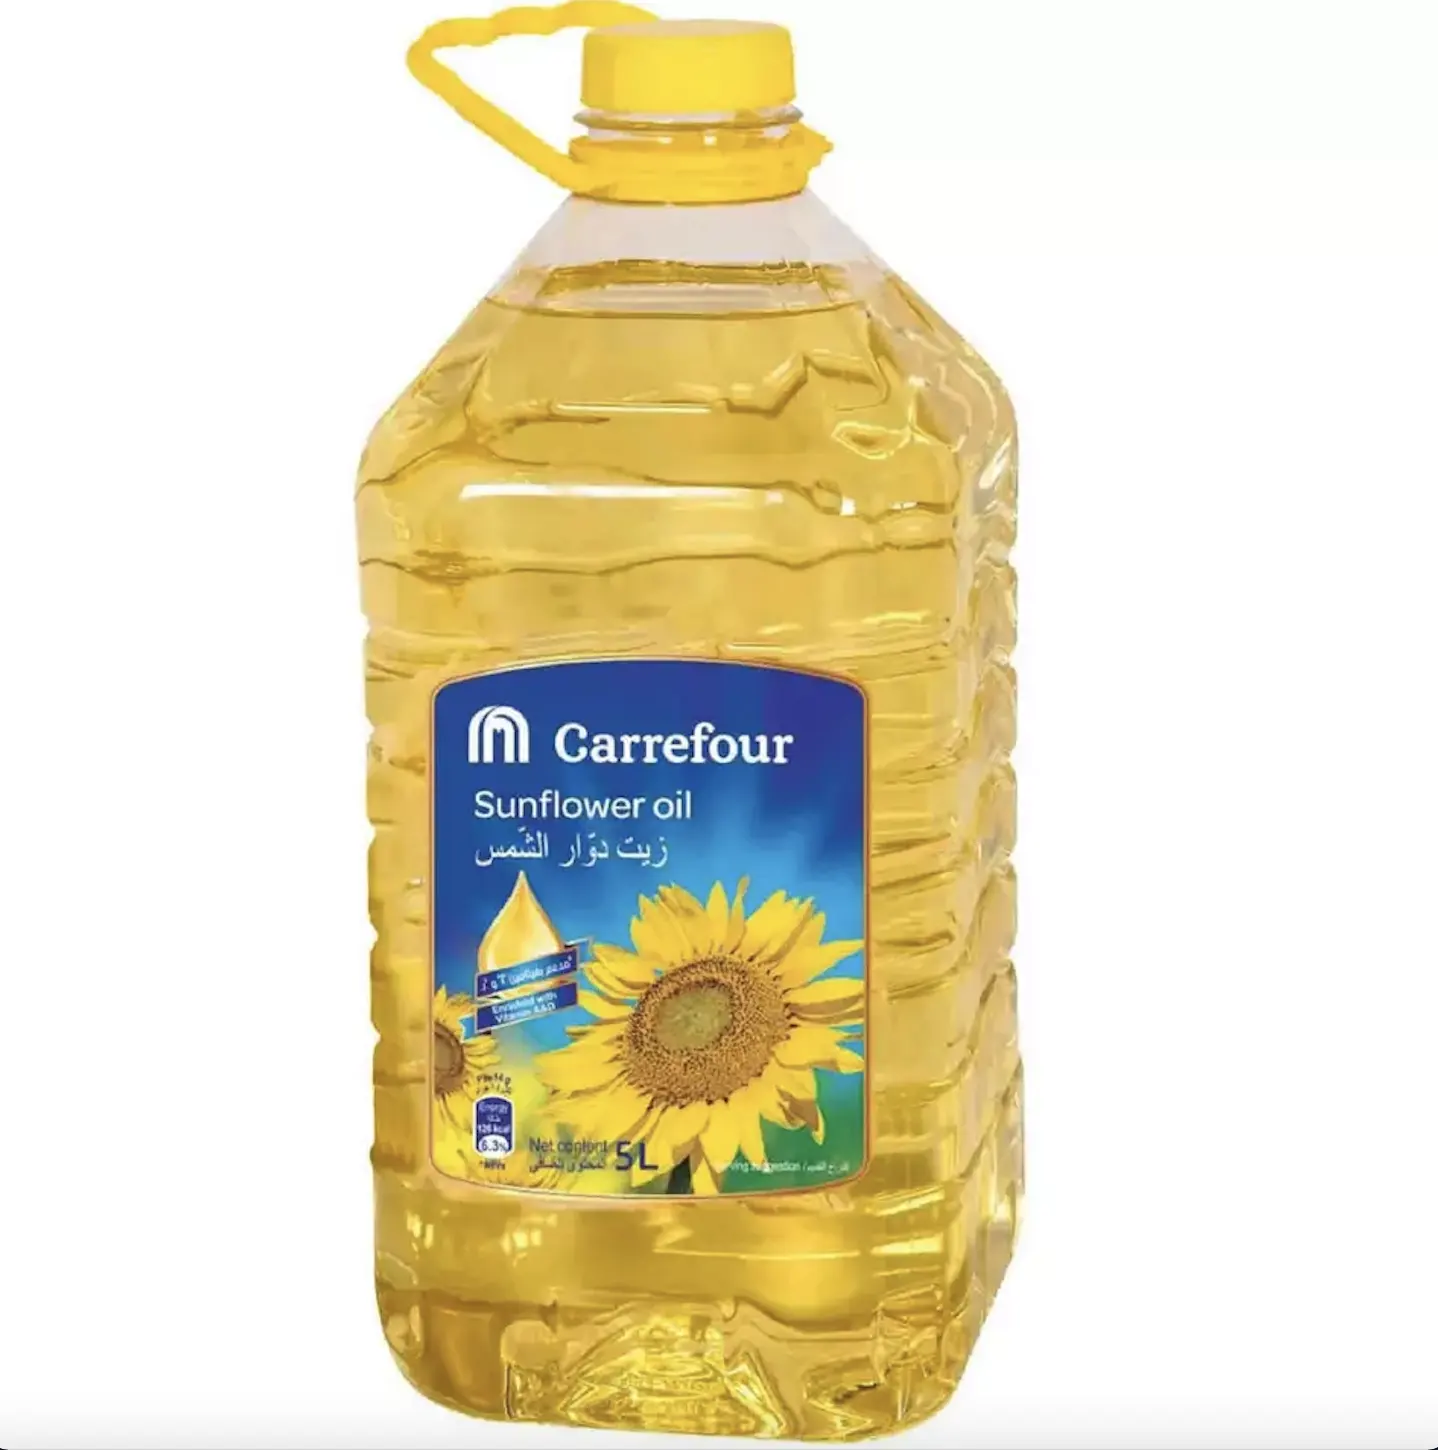 REFINED SUNFLOWER OIL 1L 2L 3L 4L, TANK DELIVERY. EDIBLE SUNFLOWER OIL FOR COOKING